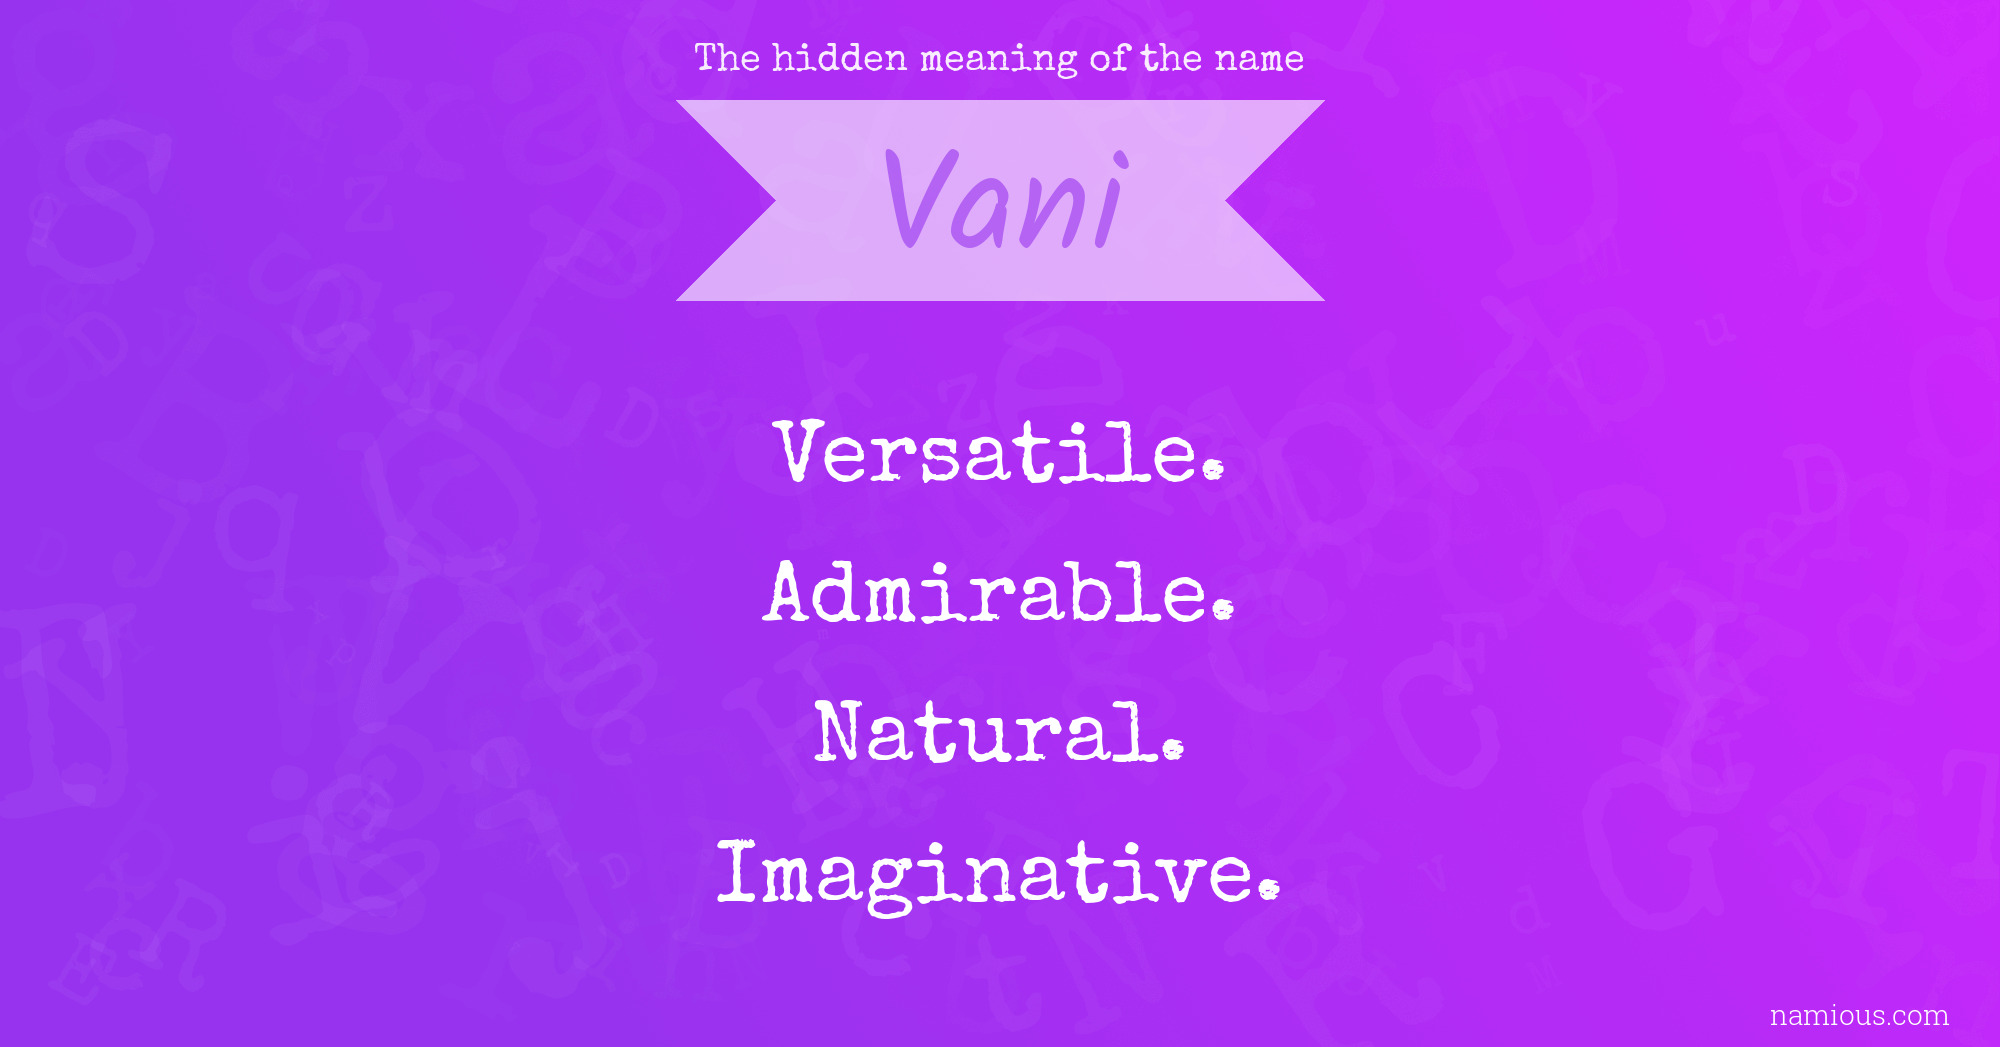 The hidden meaning of the name Vani